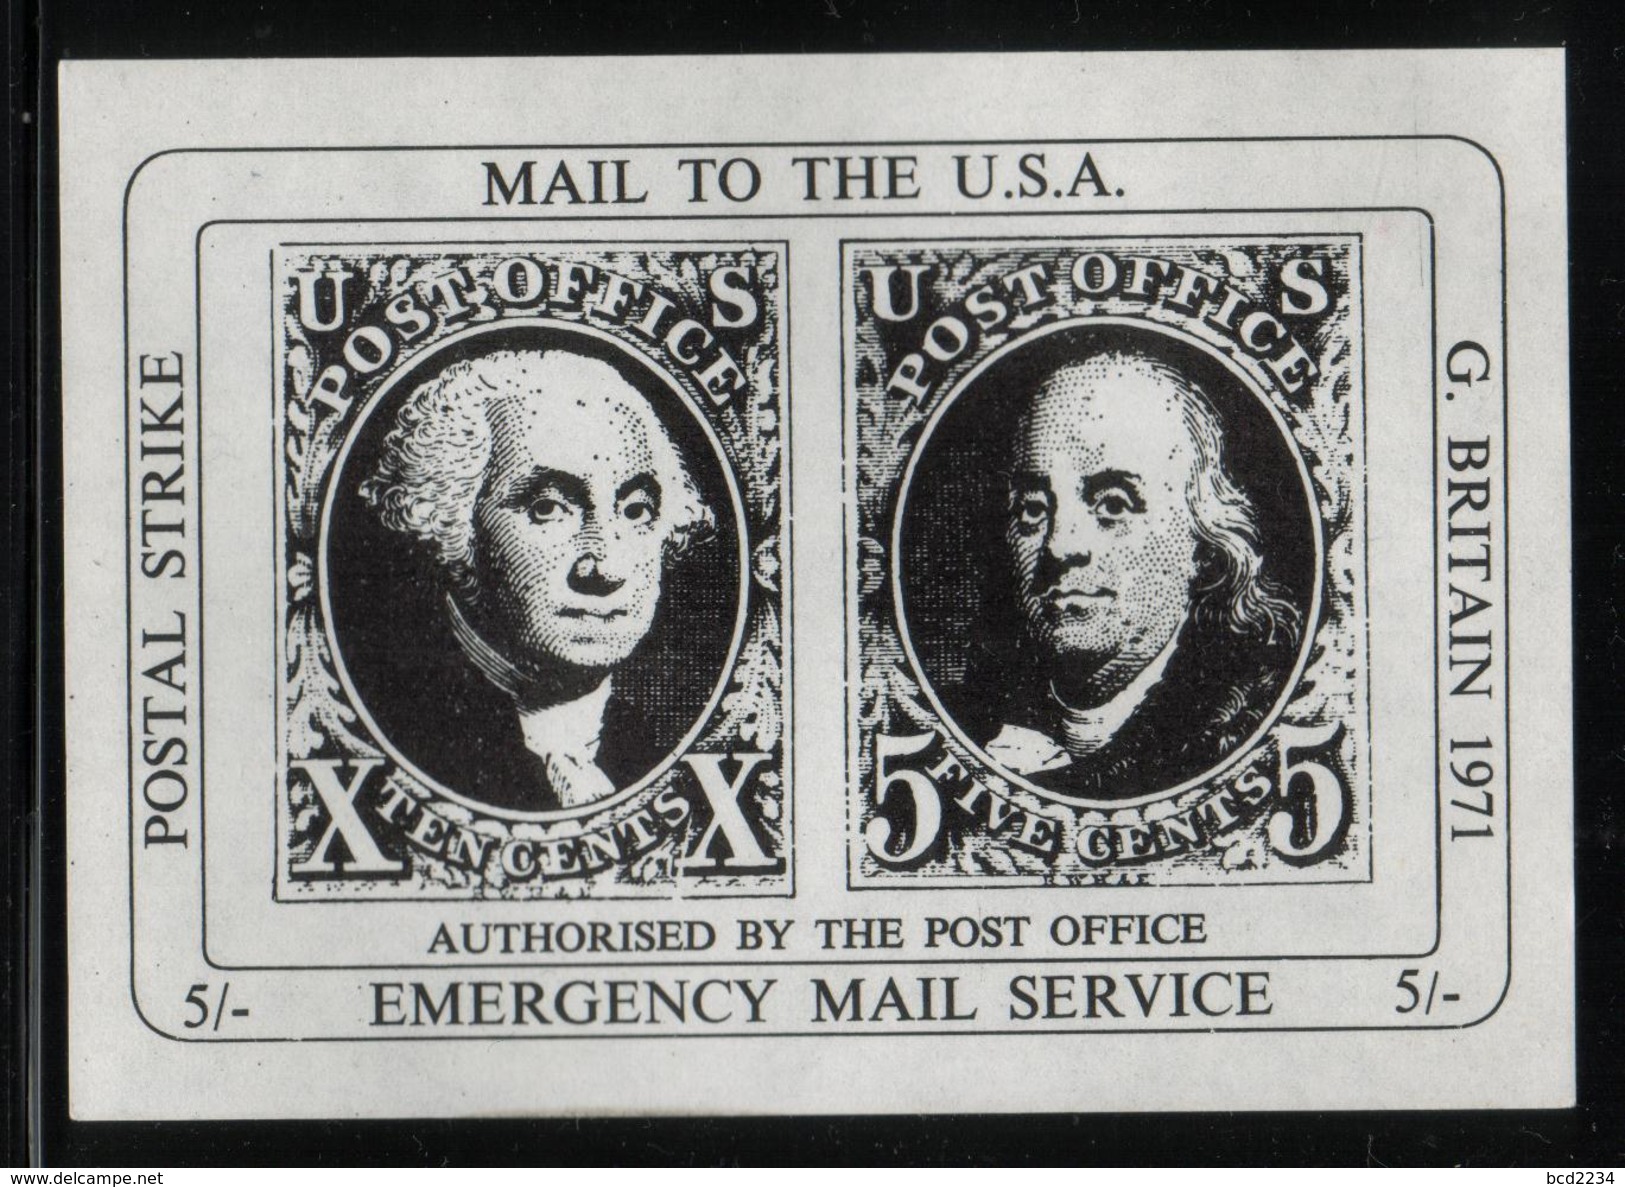 GREAT BRITAIN GB 1971 POSTAL STRIKE MAIL MAYFLOWER SERVICE TO USA US STAMPS NHM WASHINGTON FRANKLIN MINIATURE SHEET MS - Souvenirs & Special Cards